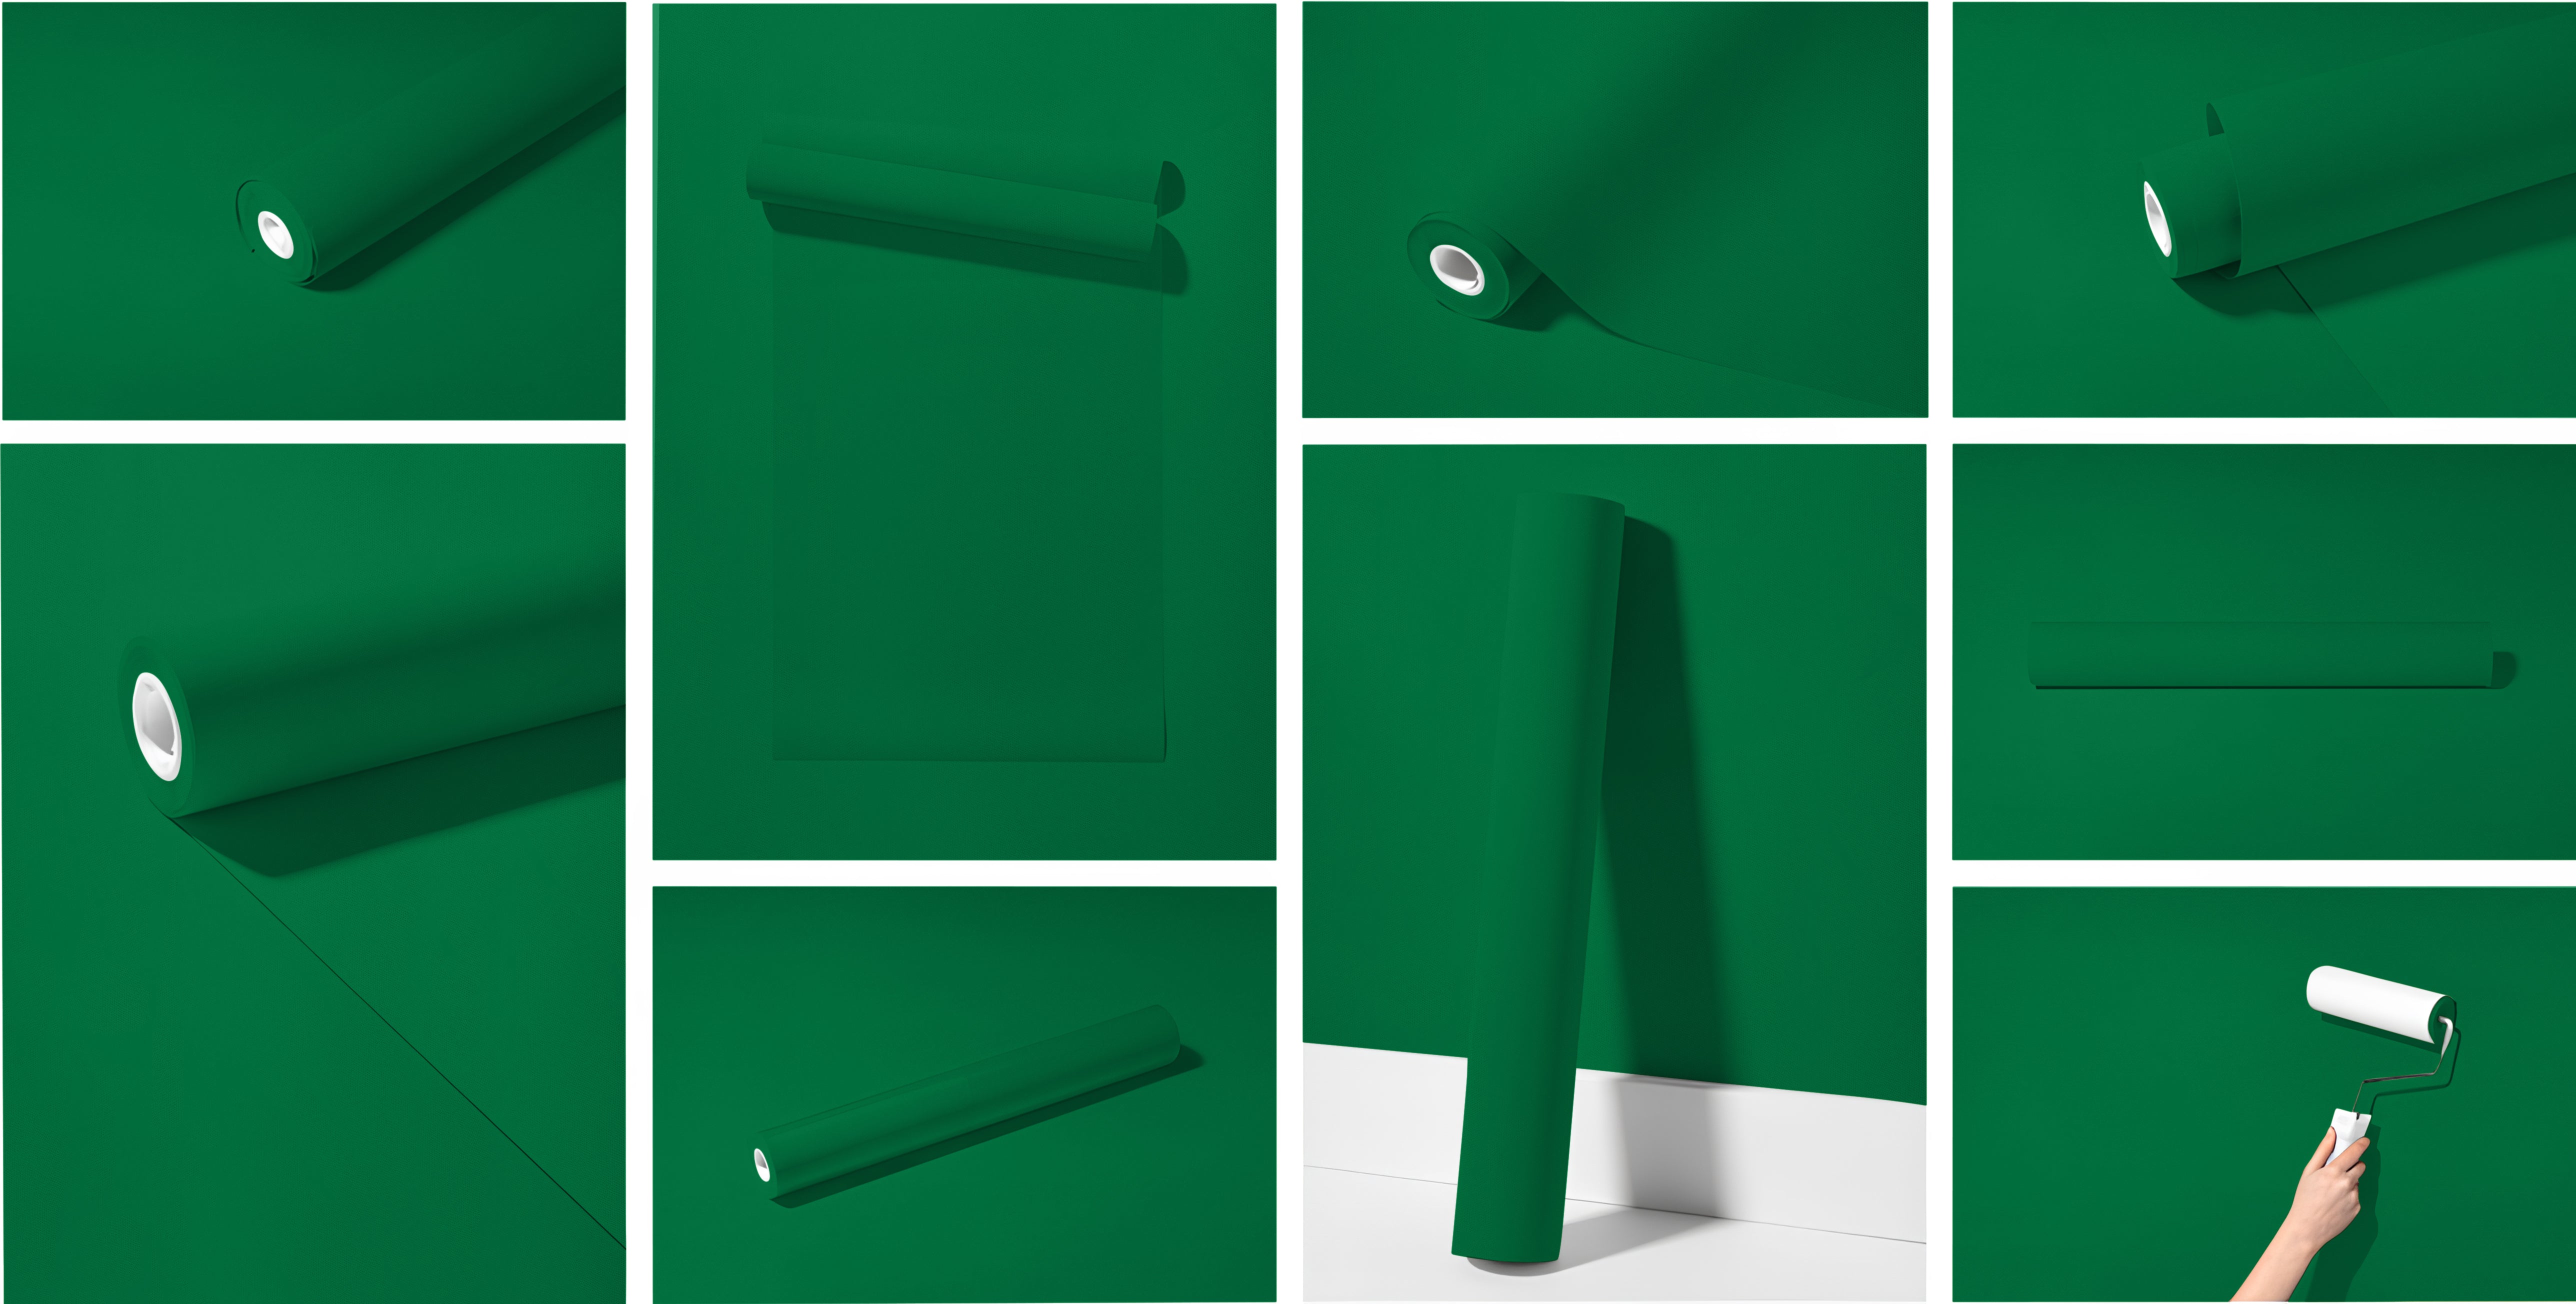 Peel & Stick Removable Re-usable Paint - Color RAL 6029 Mint Green - offRAL™ - RALRAW LLC, USA